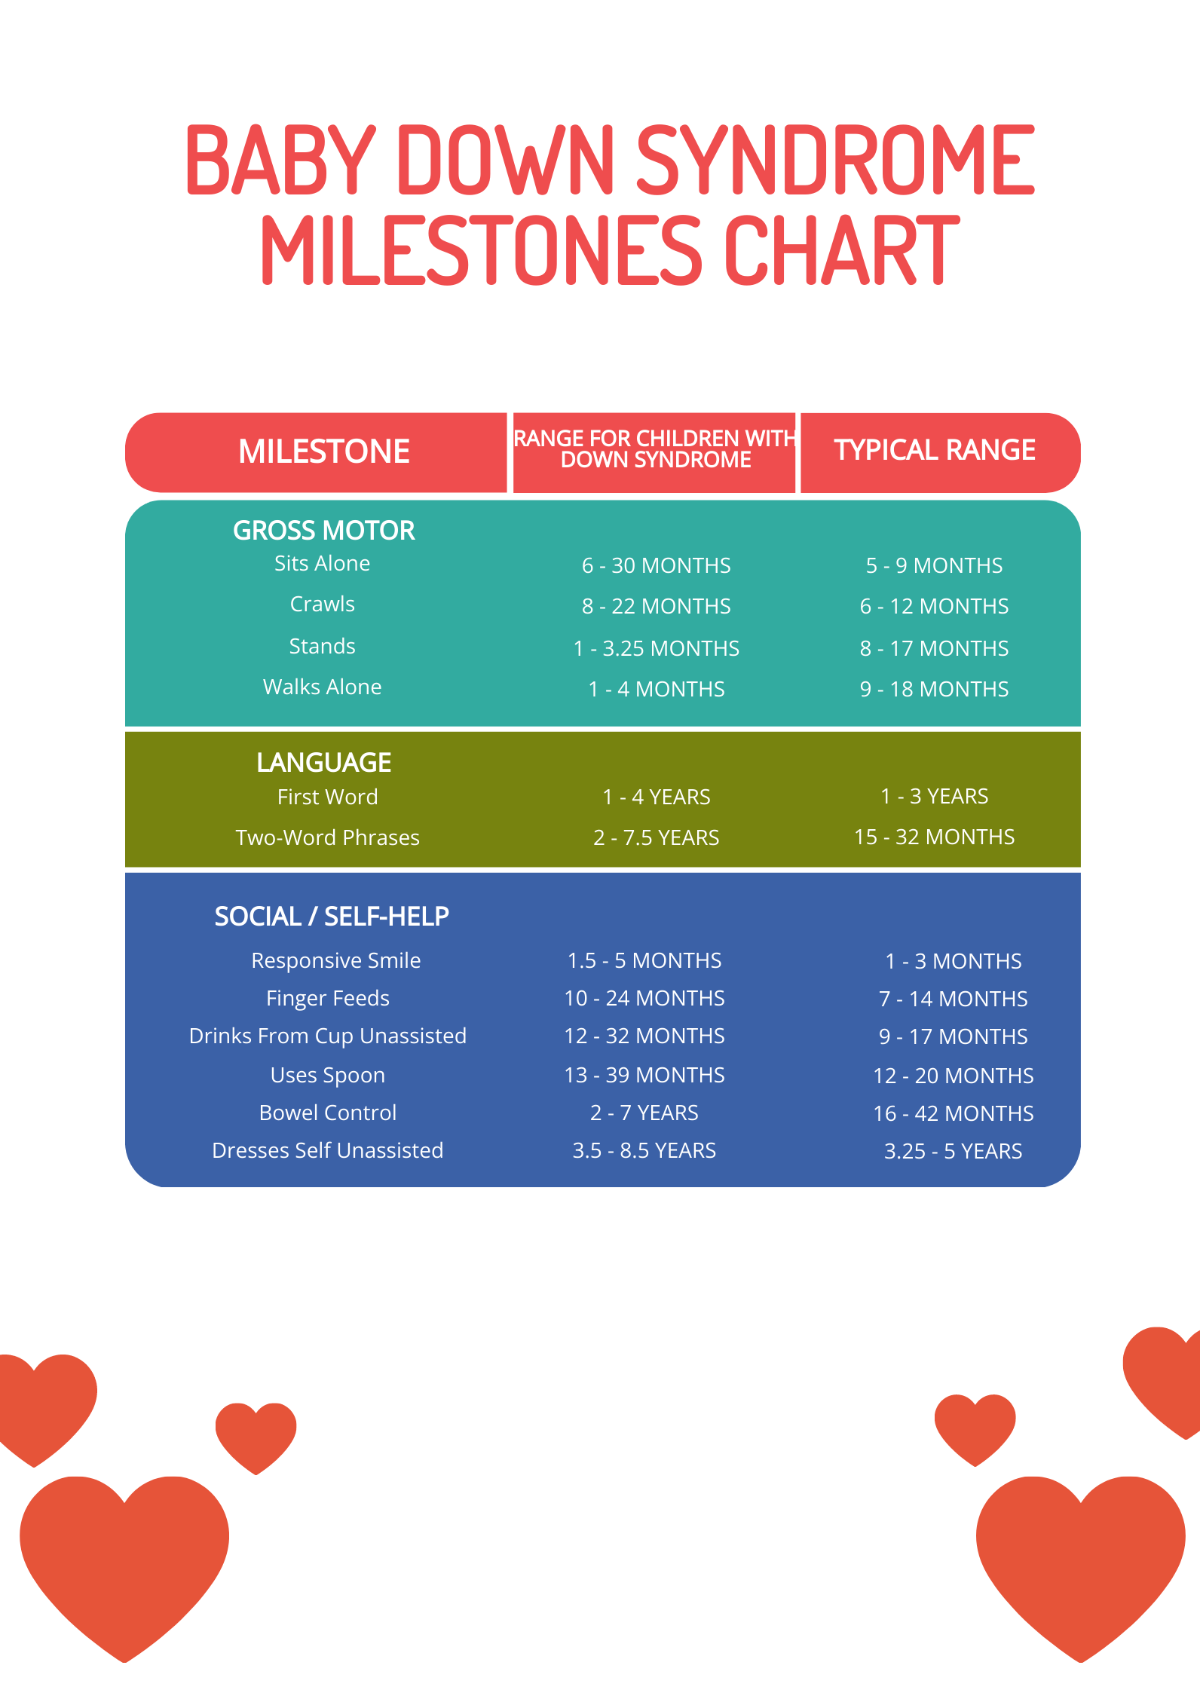 Baby Down Syndrome Milestones Chart